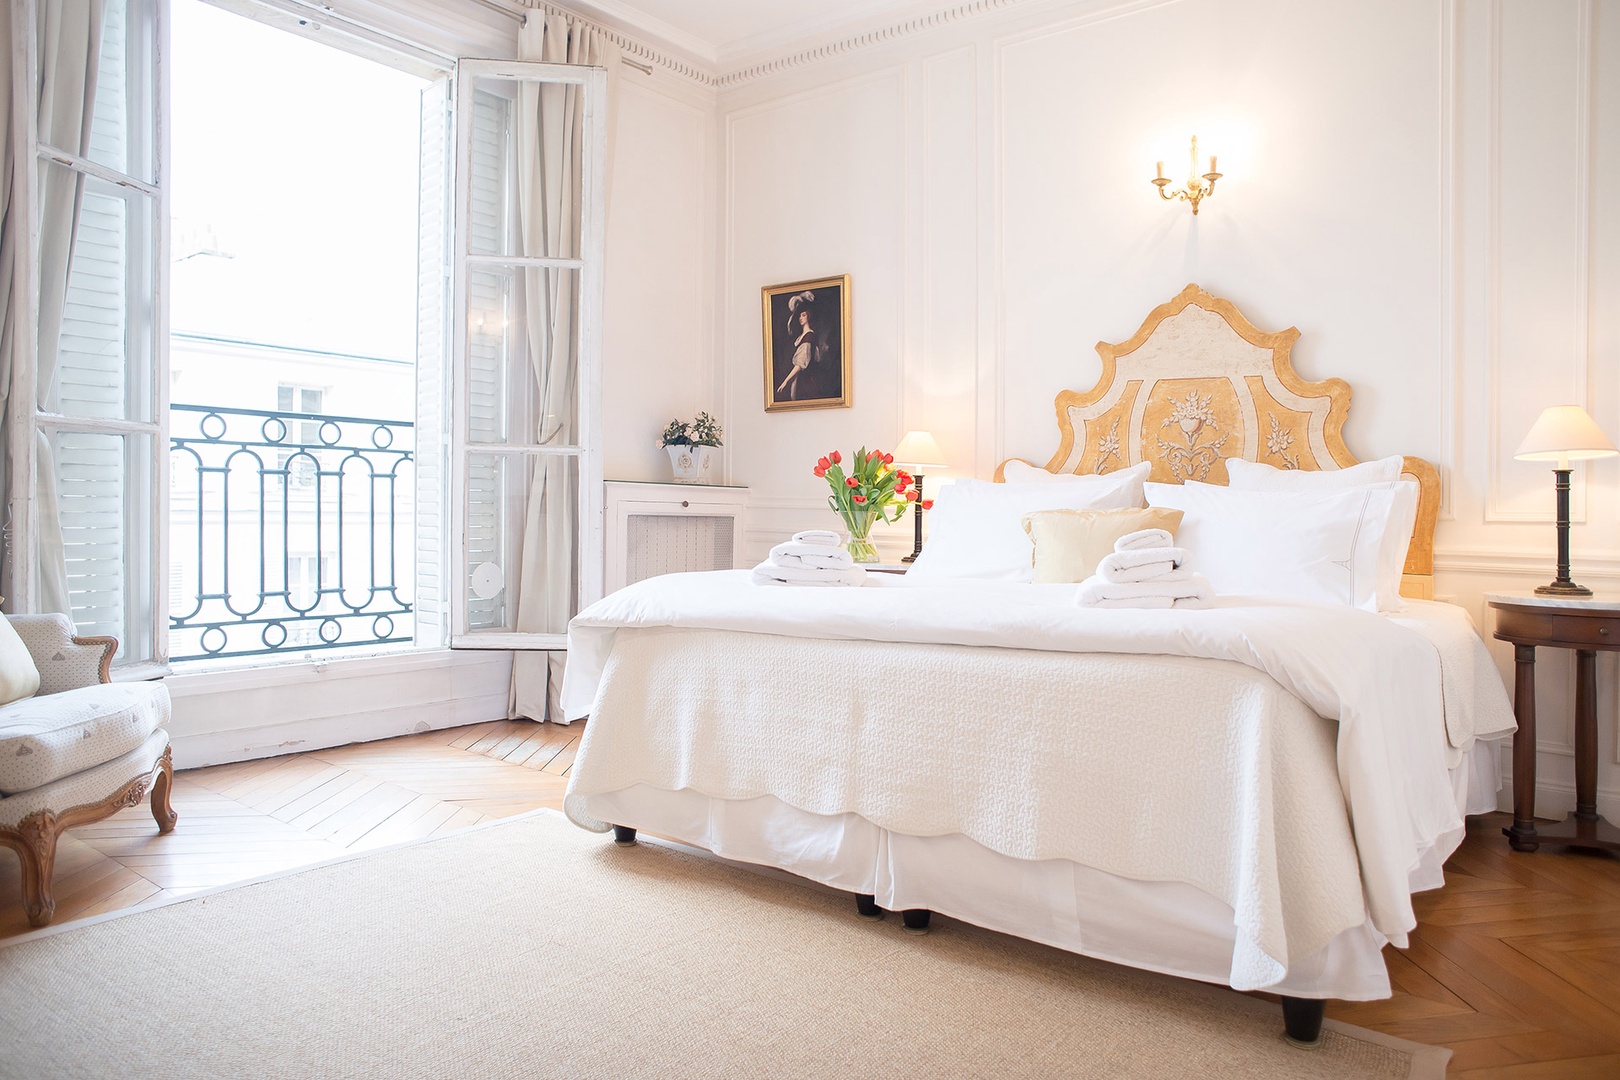 Enter the gracious bedroom 1 with comfortable bed that's fit for royalty.